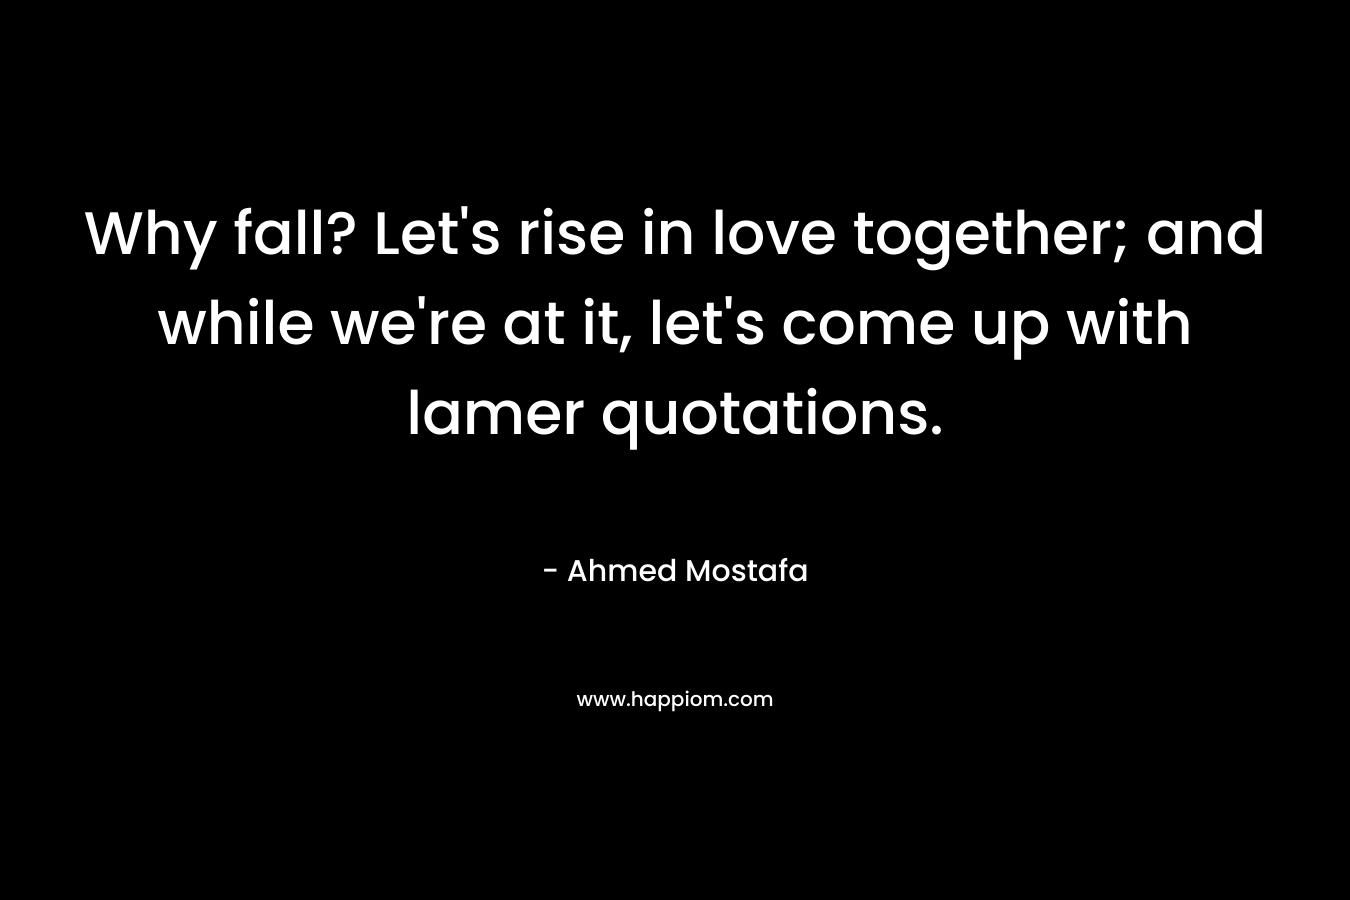 Why fall? Let's rise in love together; and while we're at it, let's come up with lamer quotations.